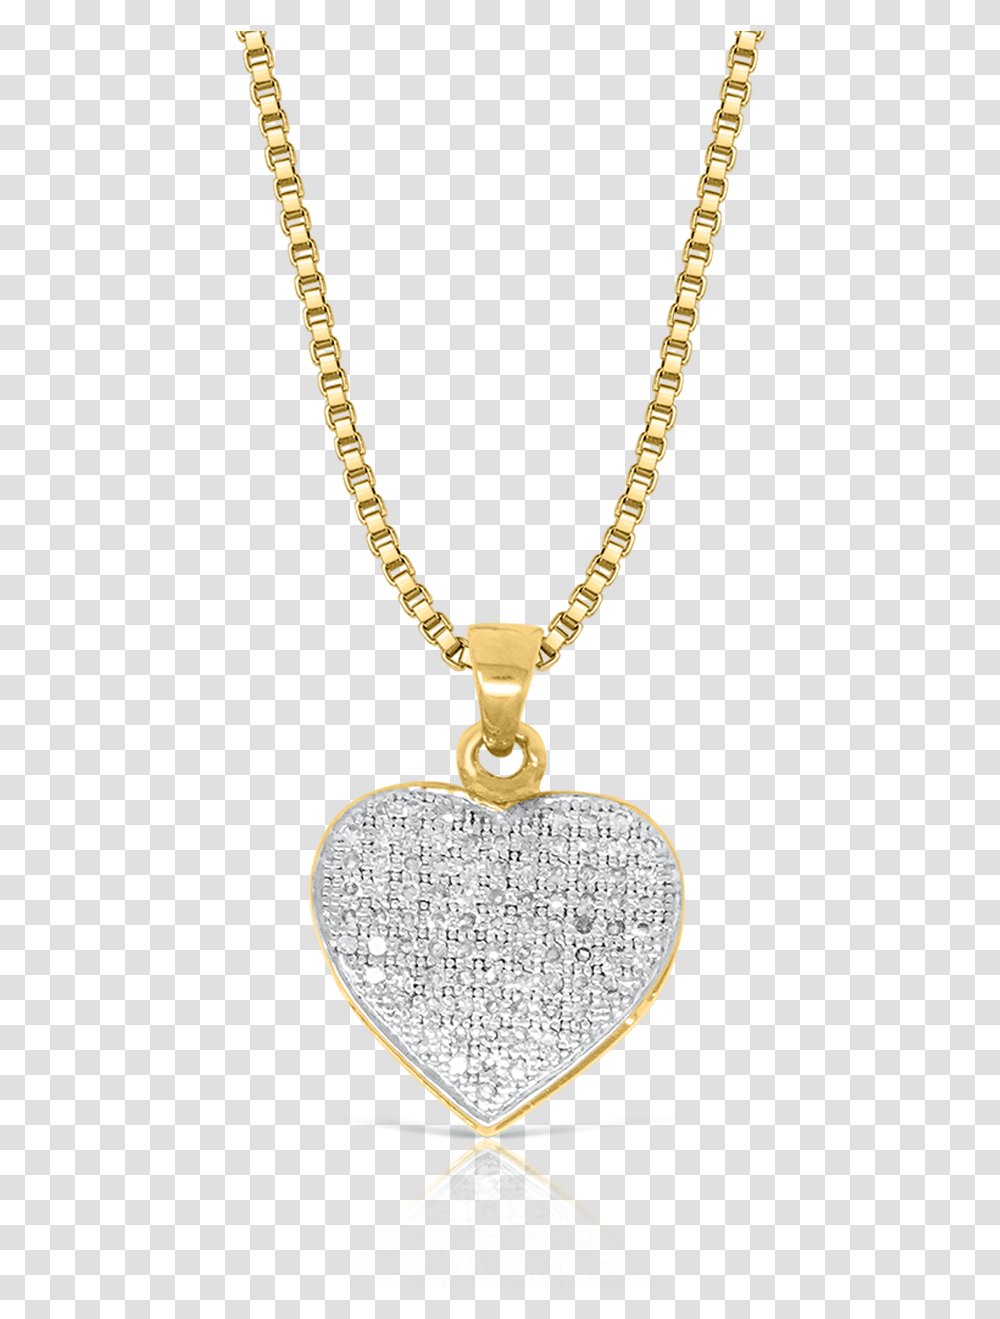 Yellow Gold Love Heart Pendant Silver Pendant, Locket, Jewelry, Accessories, Accessory Transparent Png